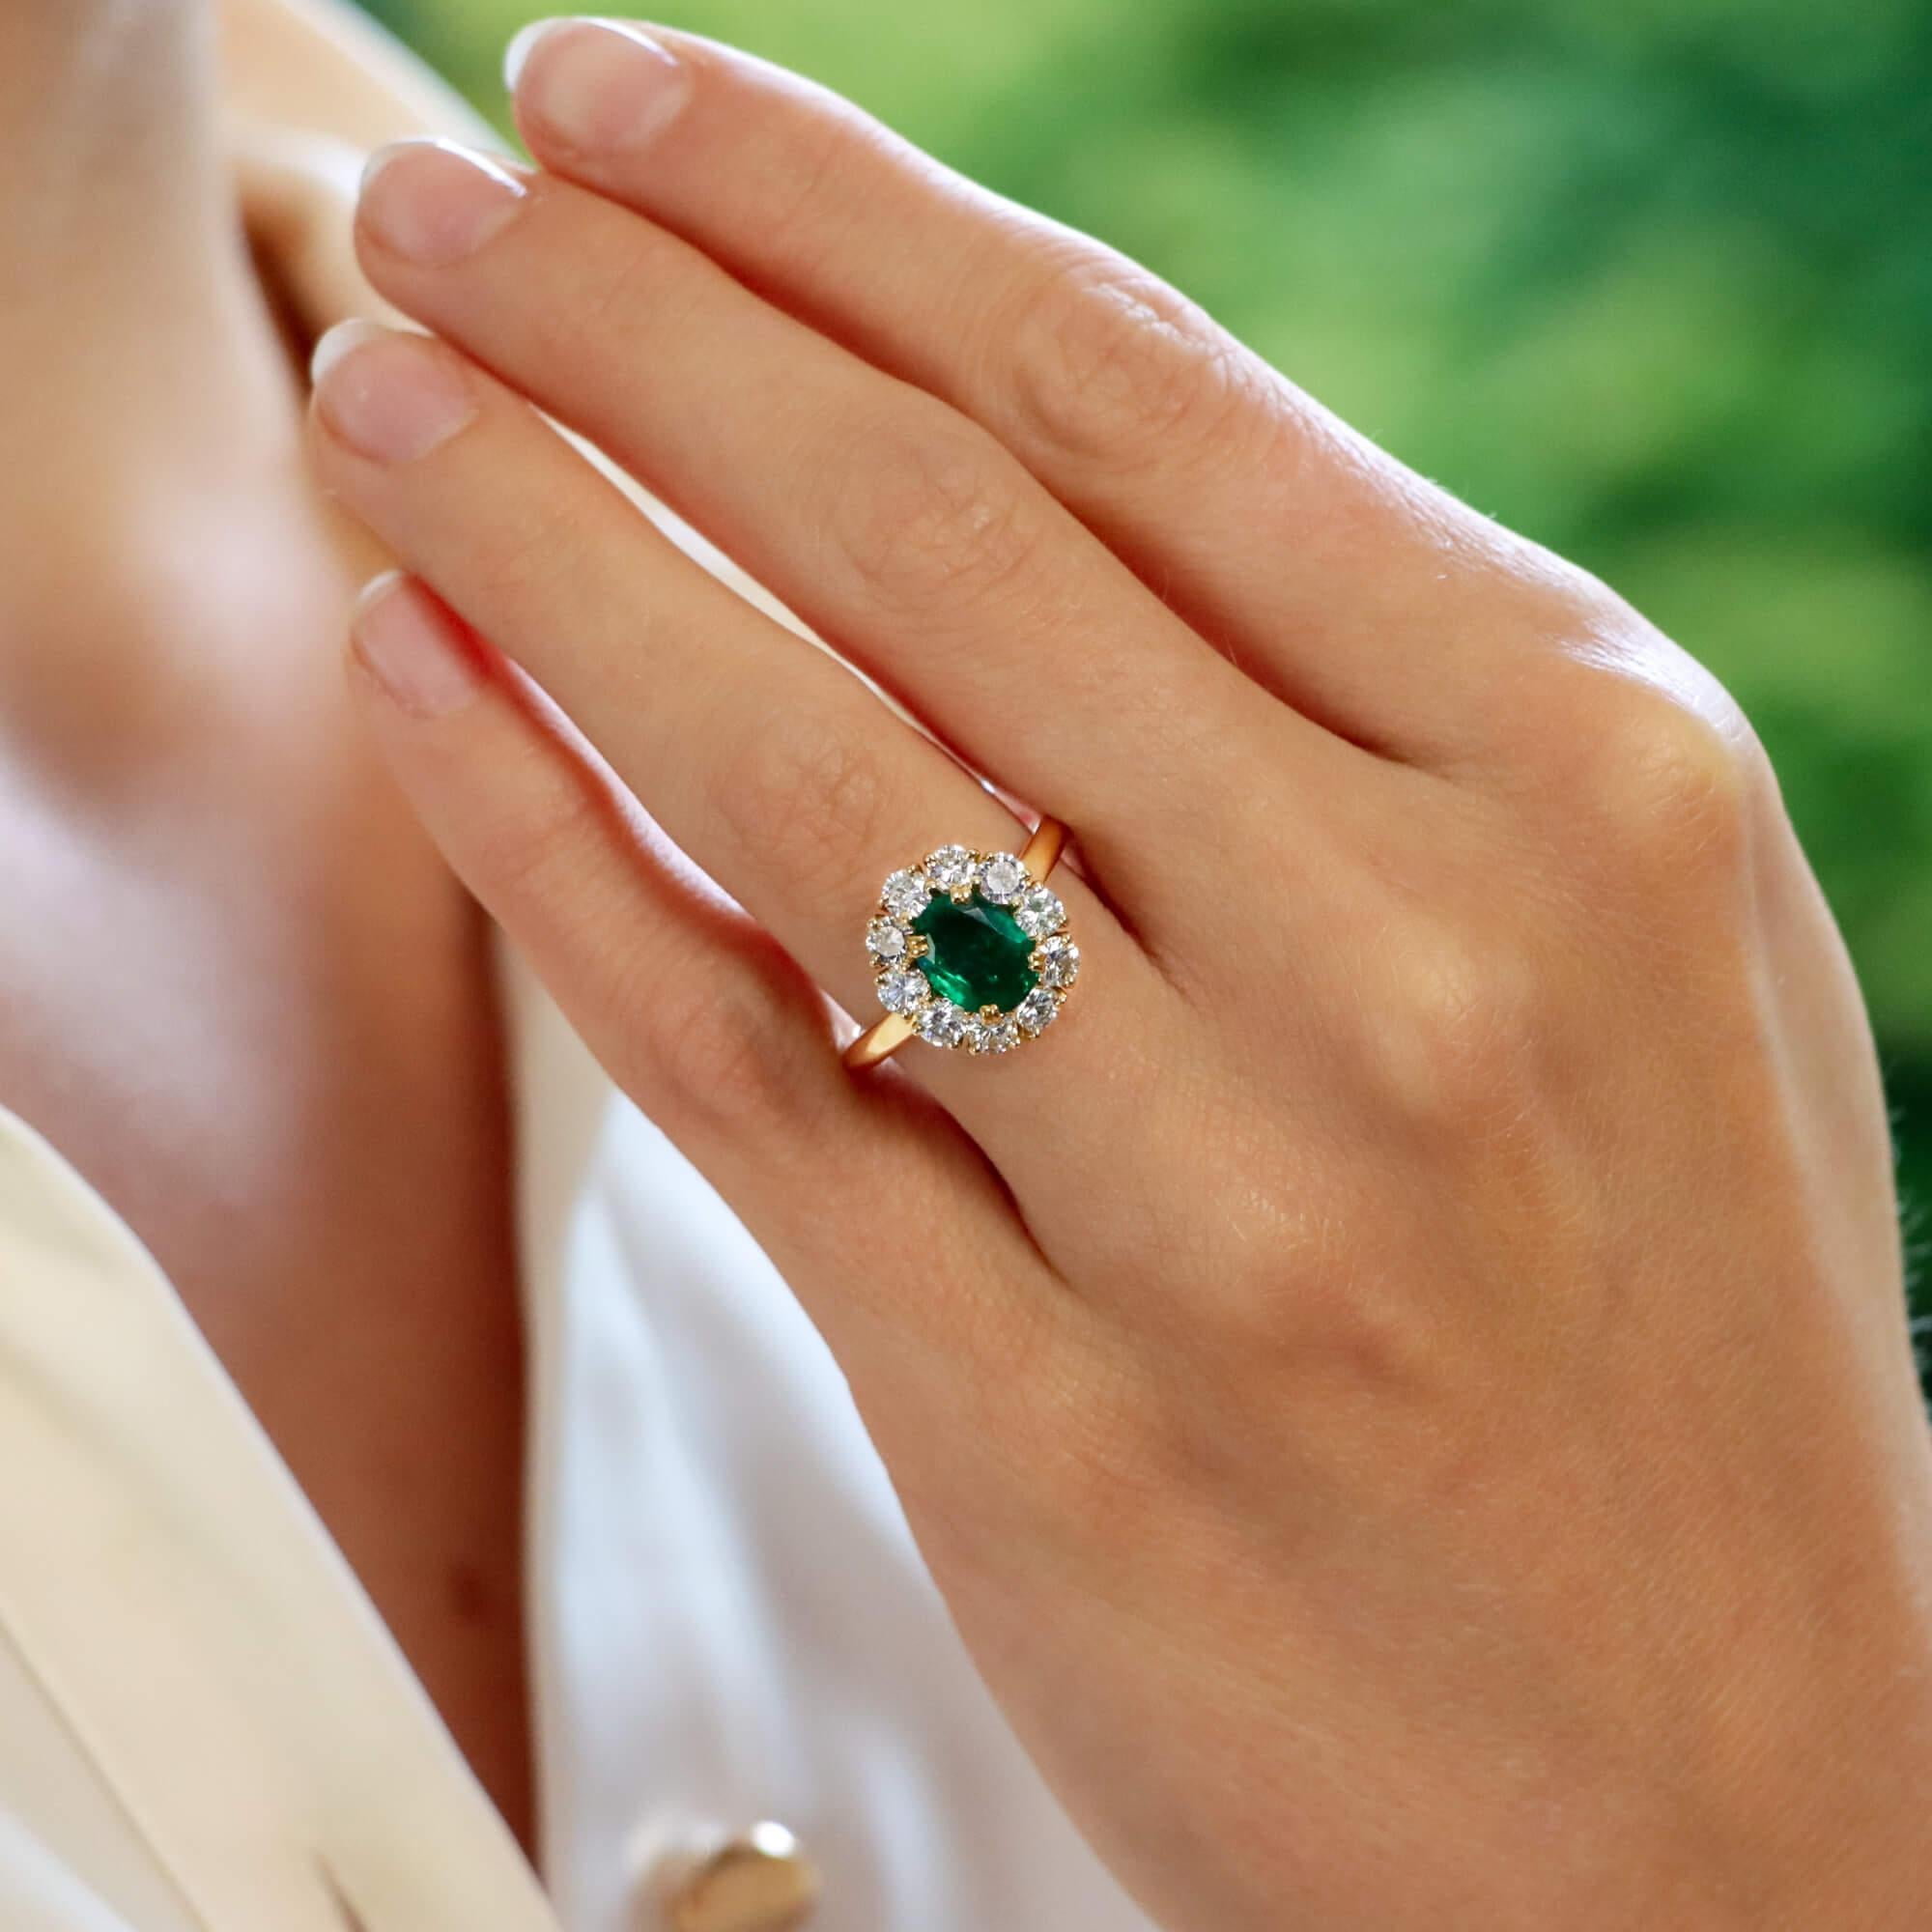 A beautiful vintage Mauboussin emerald and diamond cluster ring set in 18k yellow gold.

The piece is centrally set with a vibrant oval cut emerald which is claw set in yellow gold. The emerald has a fantastic vibrant green colour to it and is